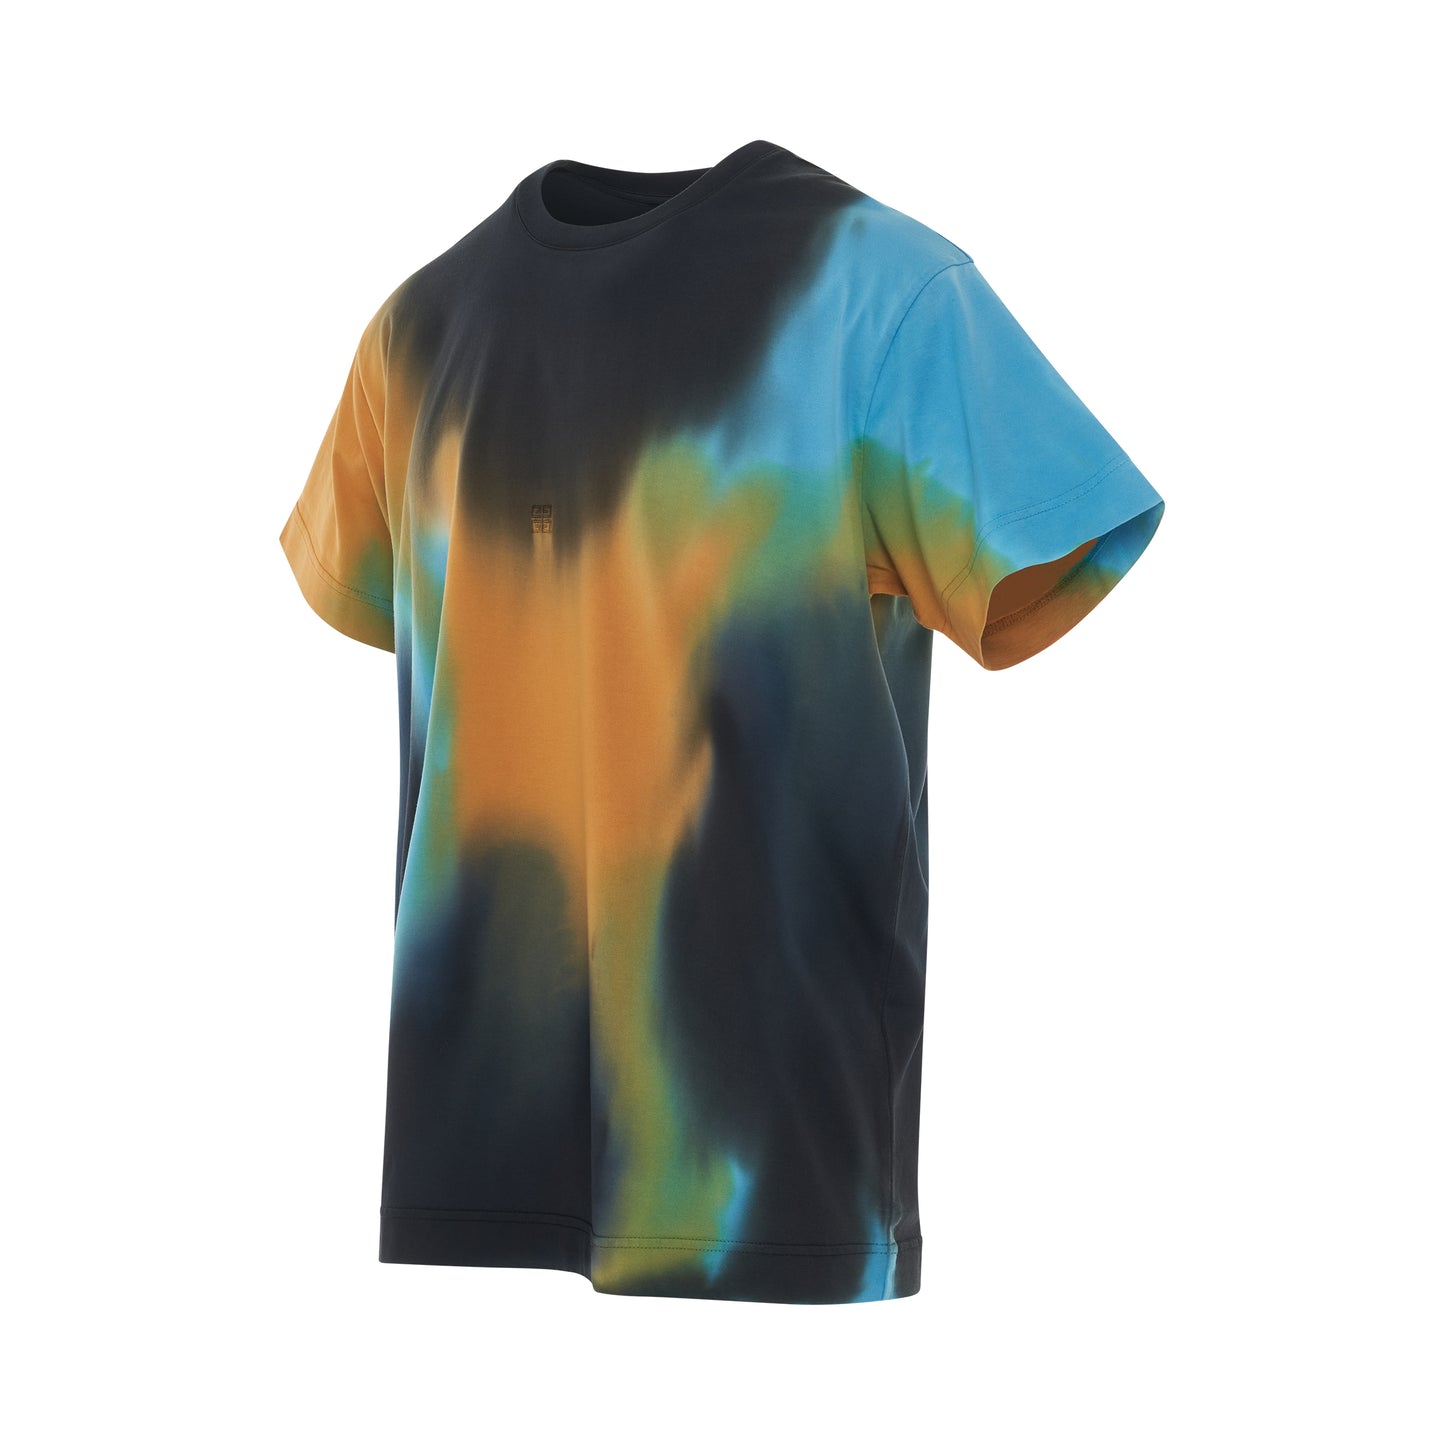 4G Embroidered Oversized Tiedye Back Cut T-Shirt in Black/Blue